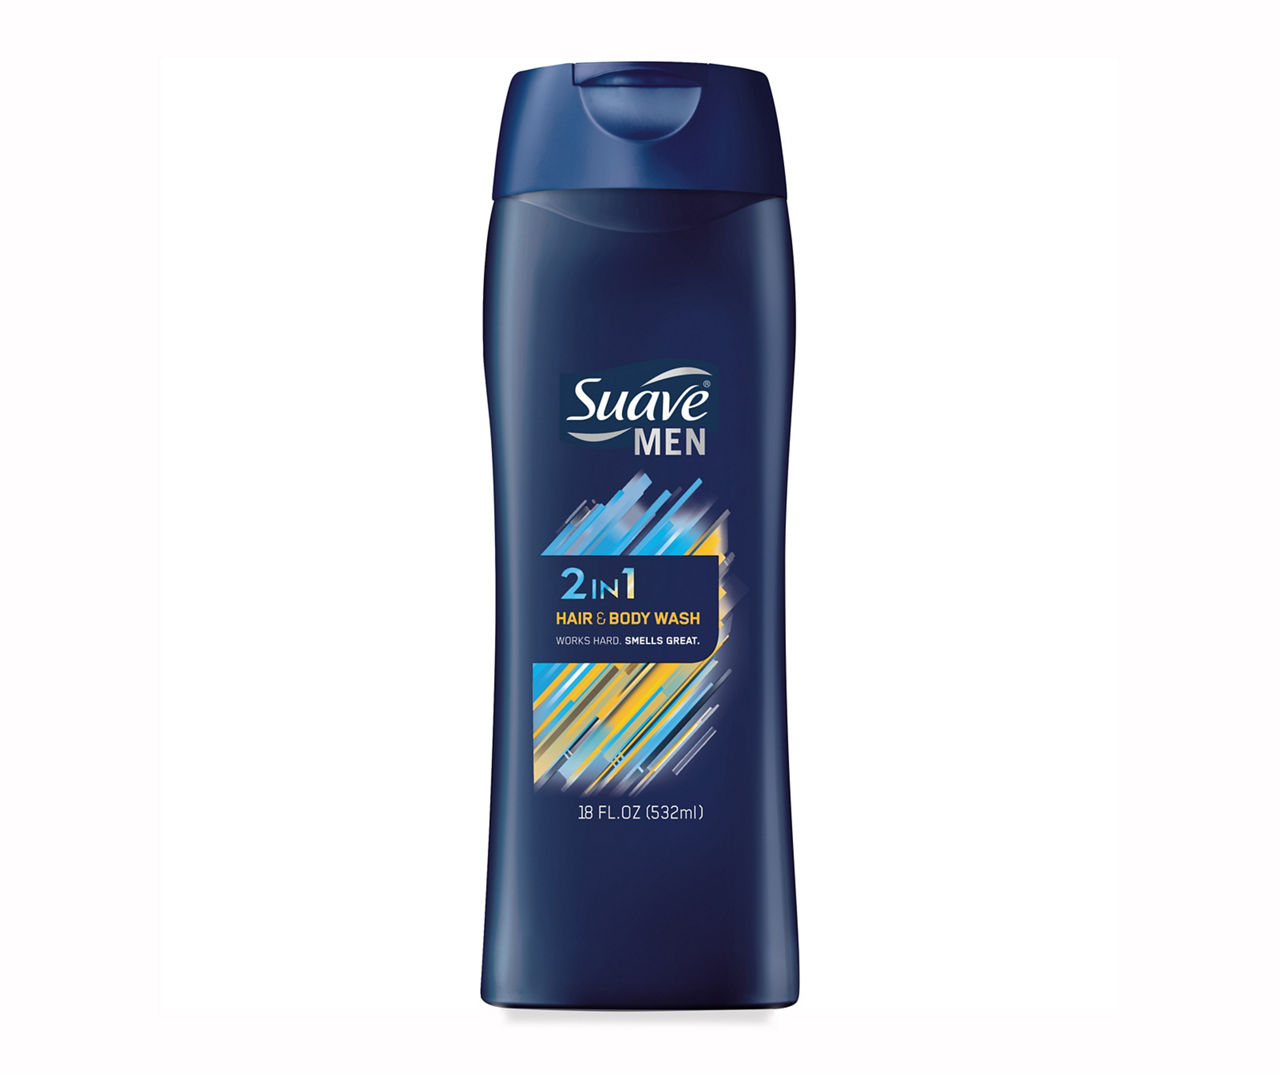 hovedvej nægte resident Suave Suave Men Hair and Body Wash 2 in 1 18 oz | Big Lots